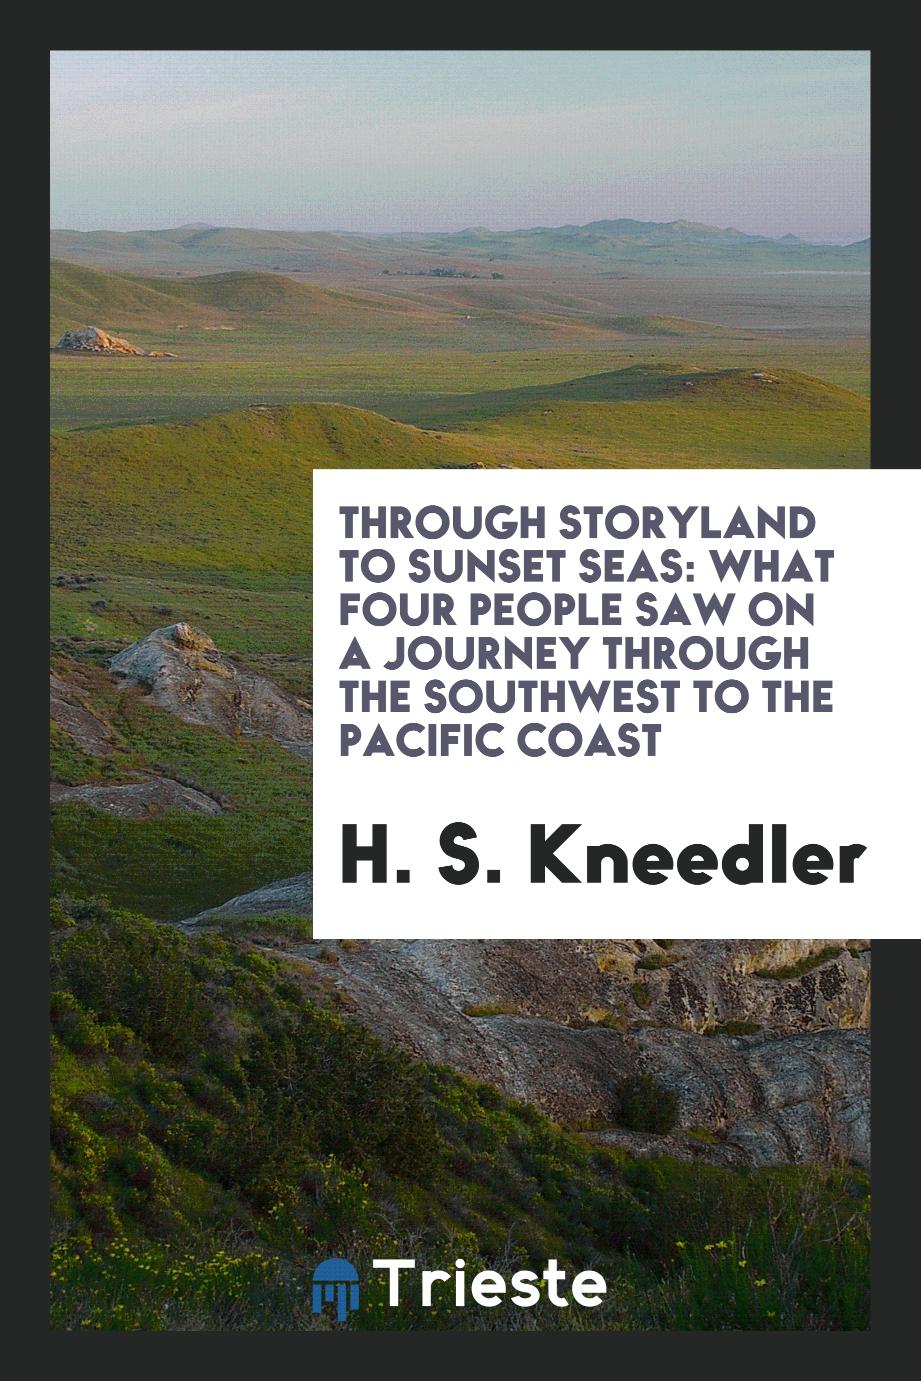 Through storyland to sunset seas: what four people saw on a journey through the Southwest to the Pacific coast